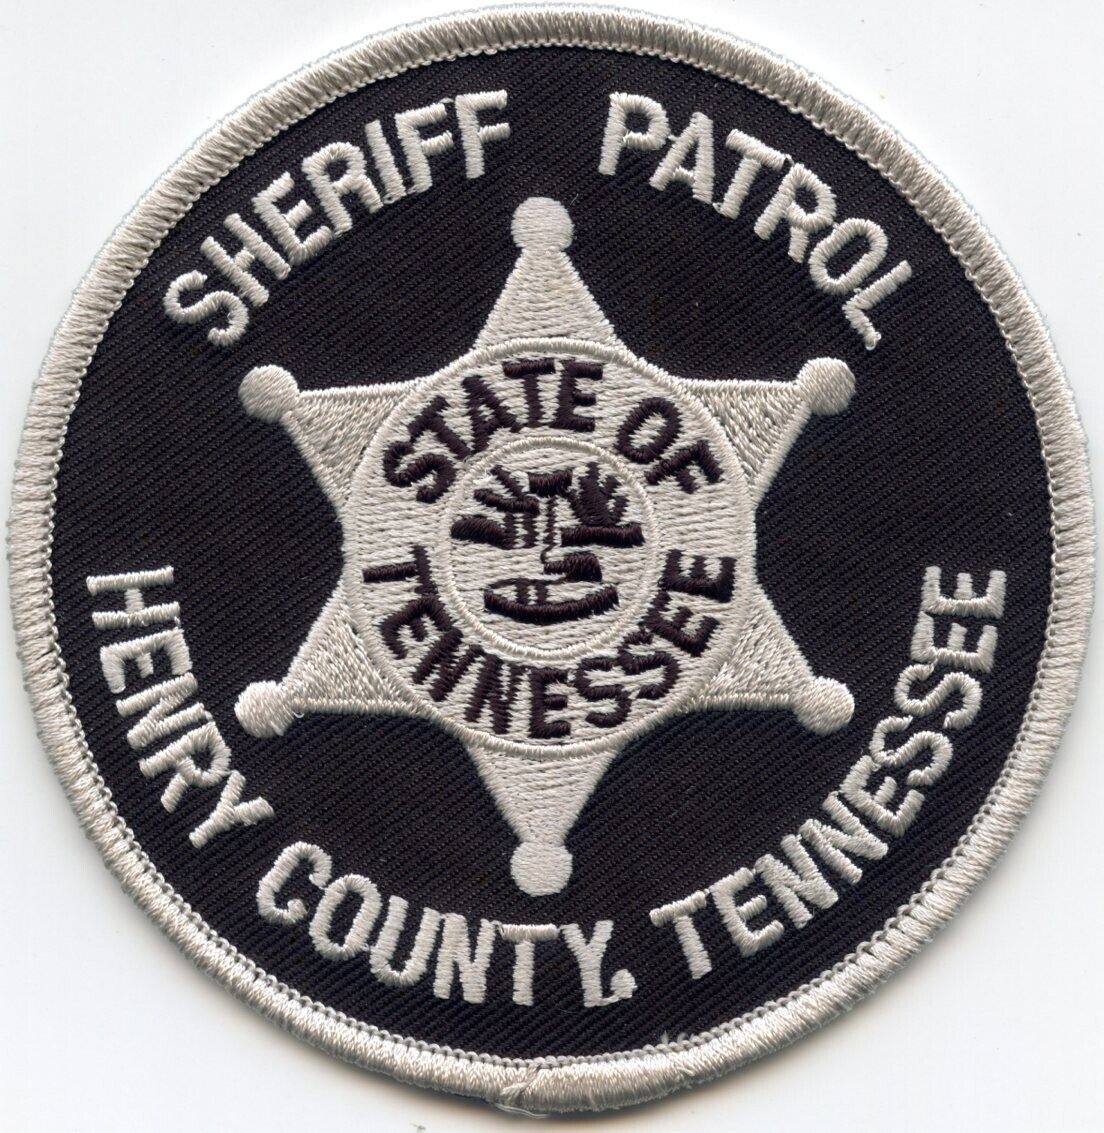 HENRY COUNTY TENNESSEE PATROL SHERIFF POLICE PATCH